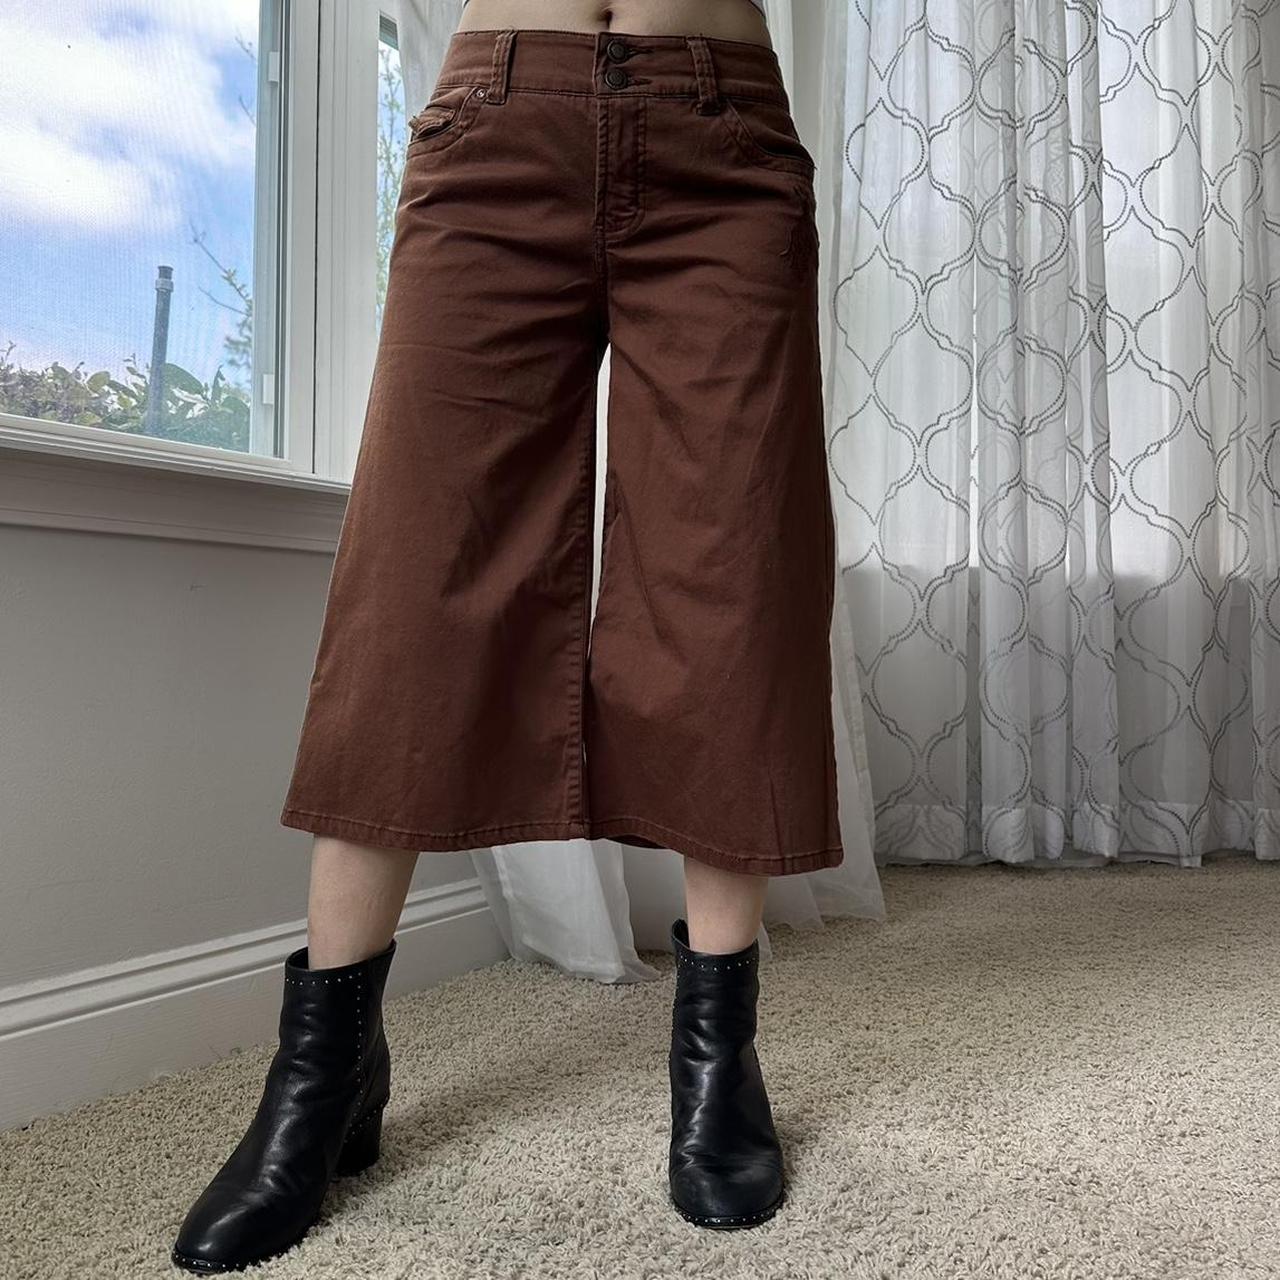 Faded Glory Women's Tan and Brown Trousers